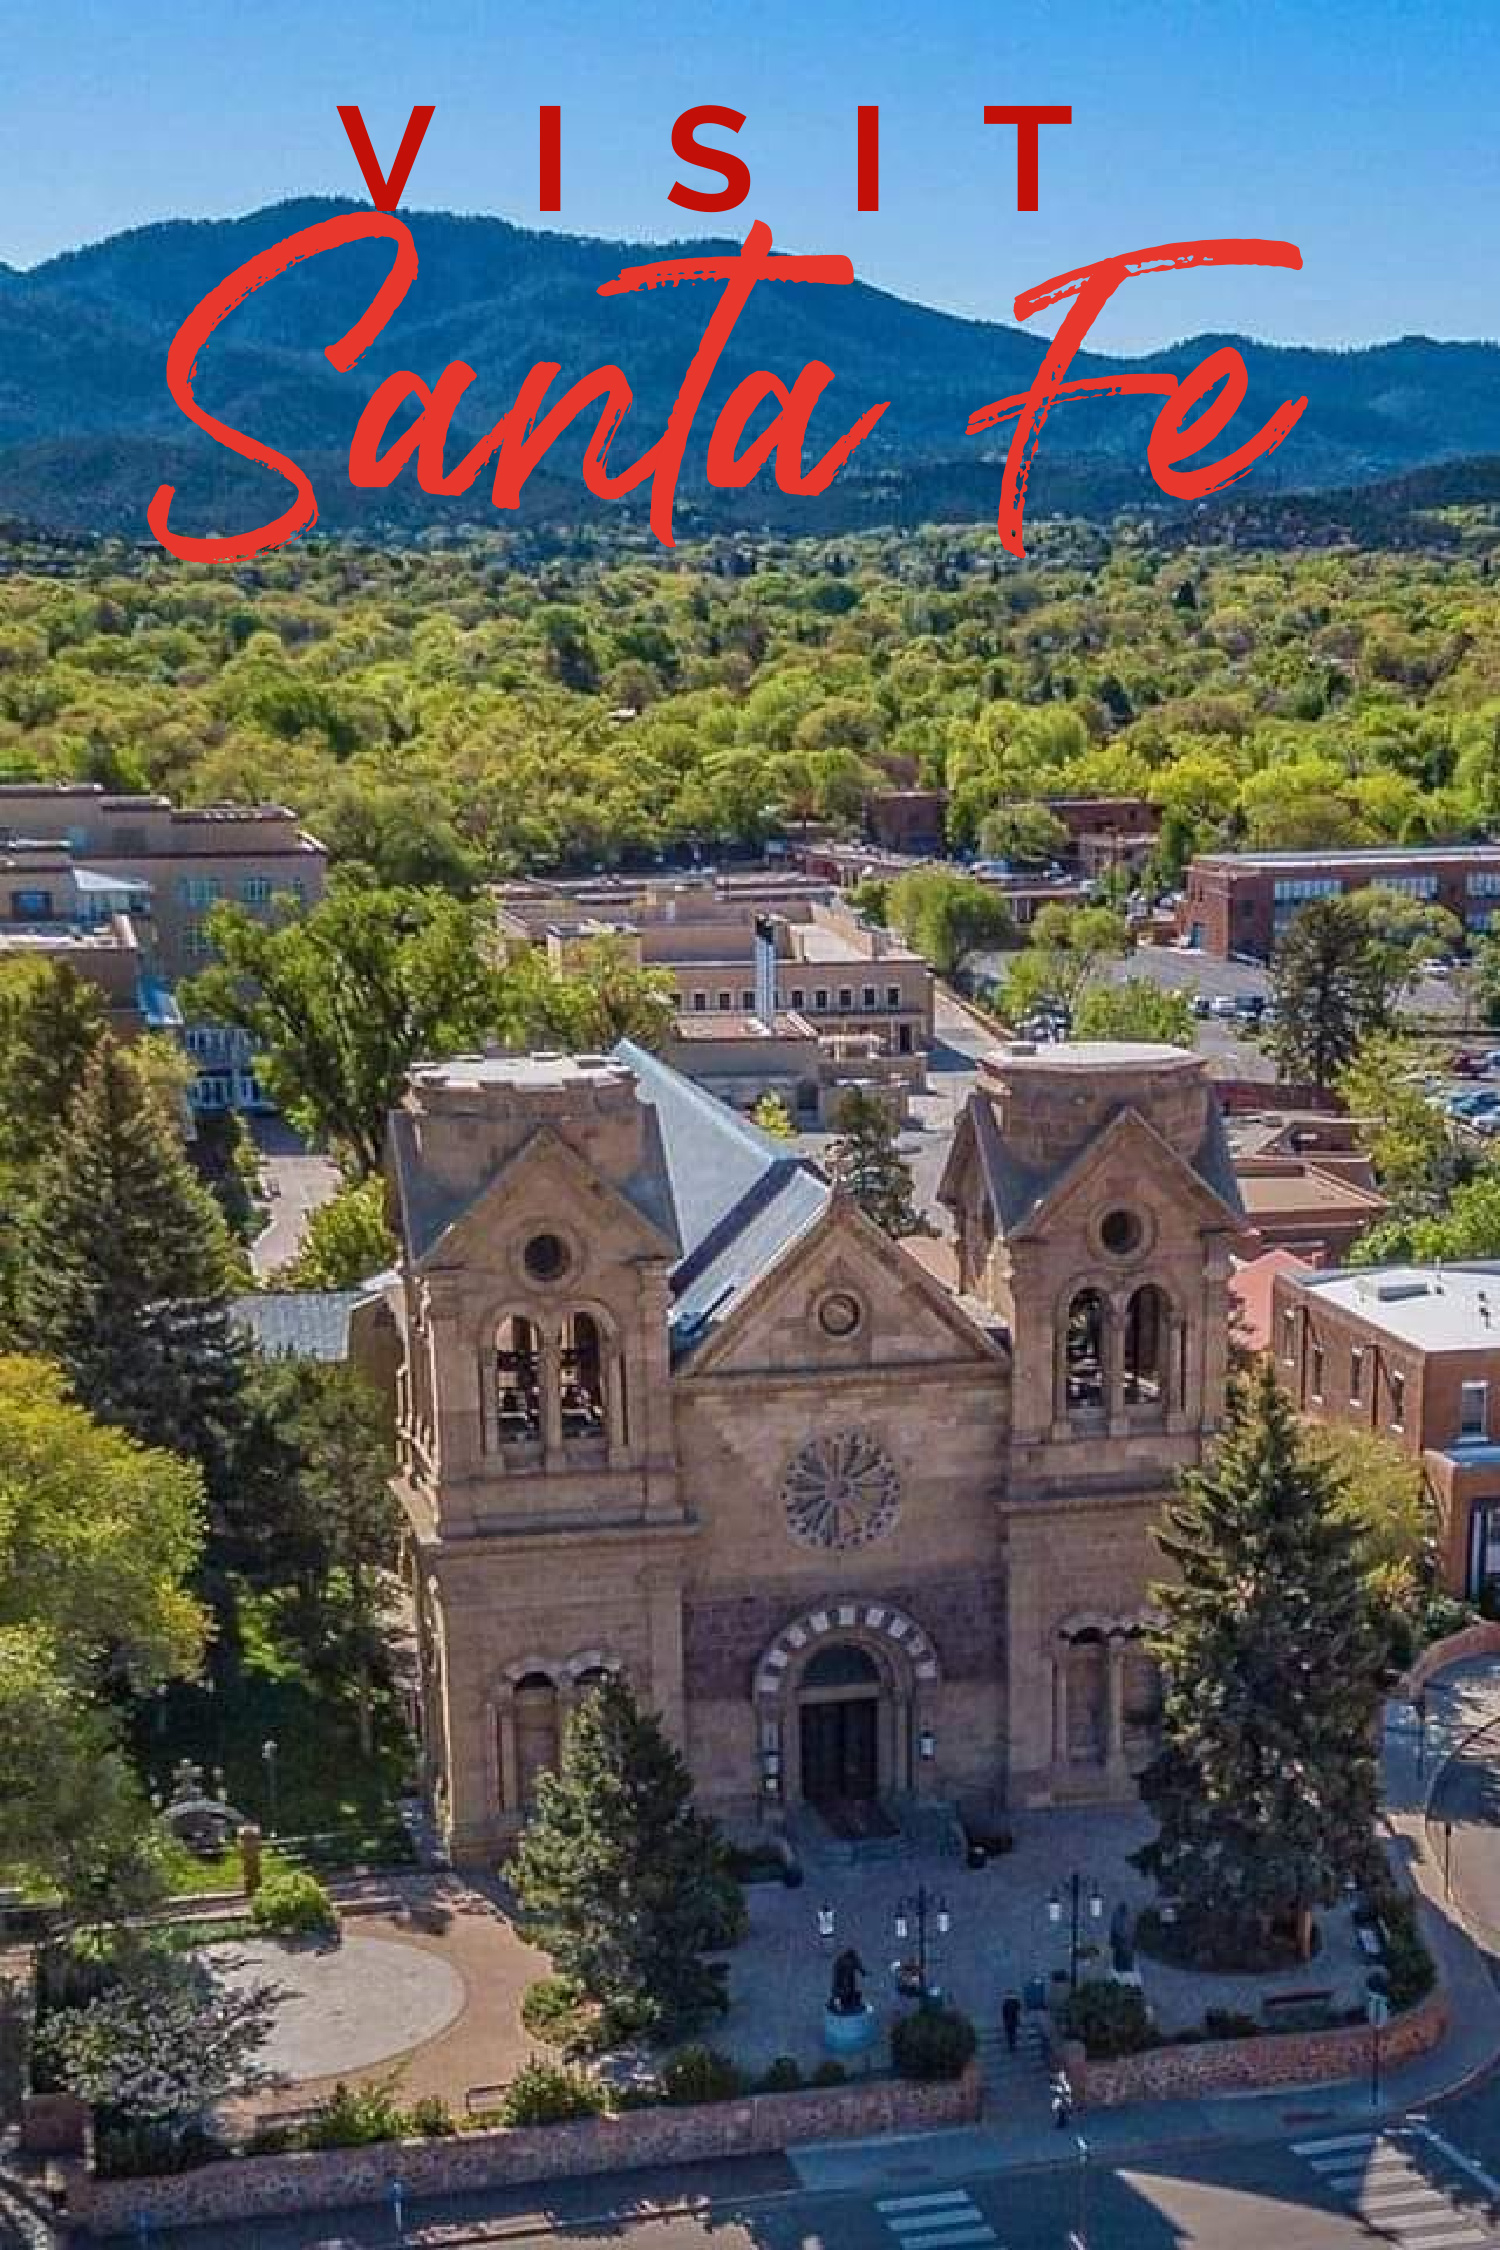 Aerial view of the cathedral basilica of Saint Francis of Assisi in Santa Fe, capturing "things to do in Santa Fe" with a "visit Santa Fe" inscription.